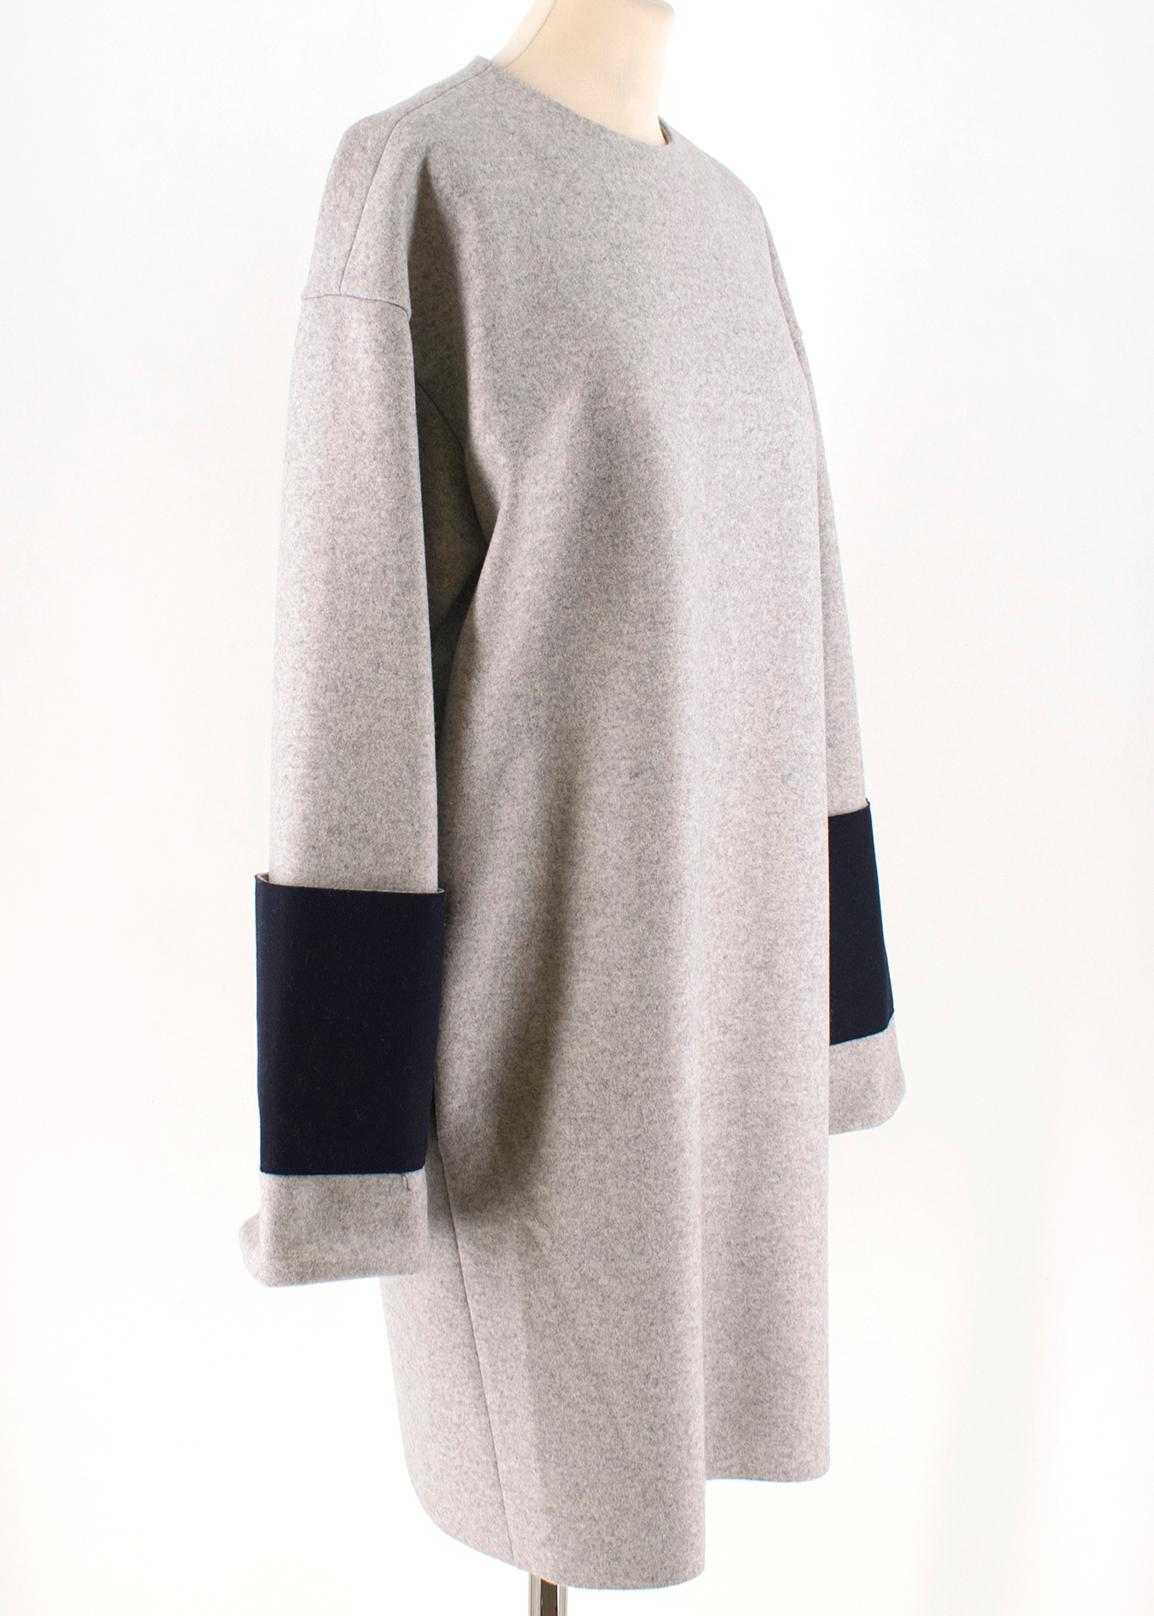 Celine contrast-cuff wool shift dress

- Light-grey, heavyweight bonded wool
- Round neck, long sleeves 
- Contrasting navy boiled-wool oversized cuff panel 
- Centre-back concealed-zip fastening 
- Light-grey satin binding 

Please note, these